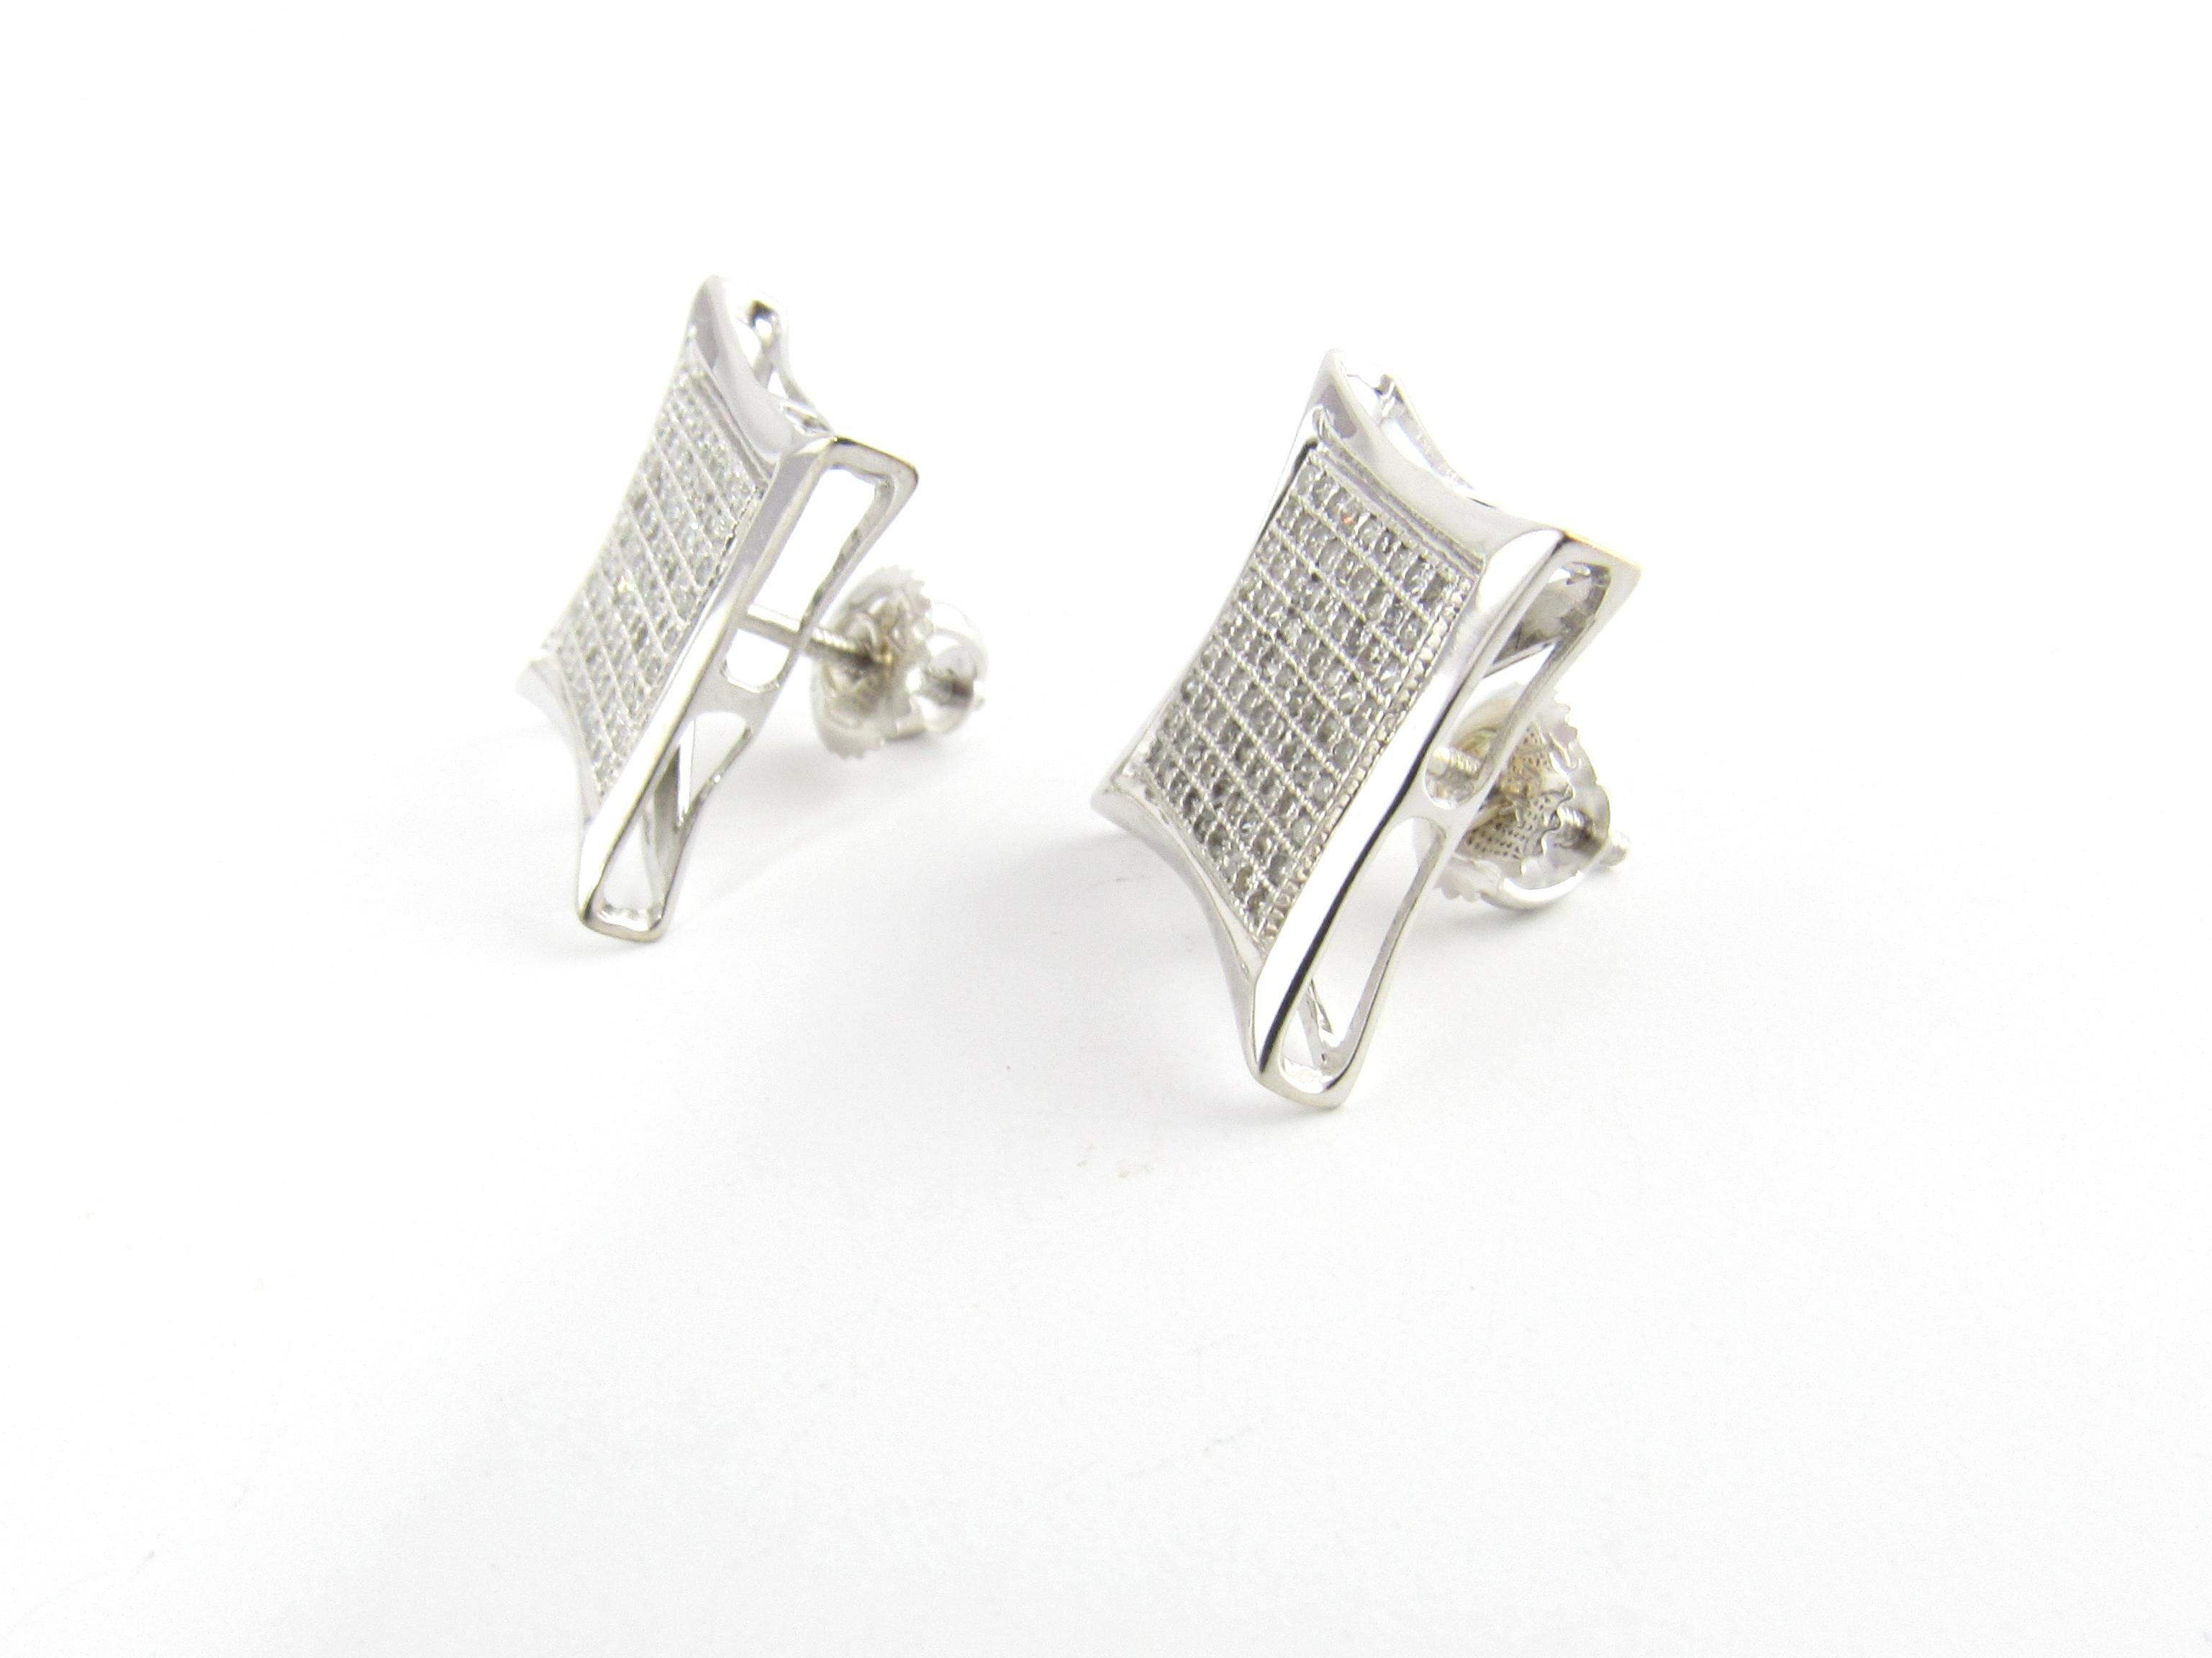 14 Karat White Gold Diamond Earrings-

These sparkling post earrings feature 81 single cut diamonds set in 14K white gold in each.

Approximate total diamond weight: 1.62 cts.

Diamond color: J
Diamond clarity: I1

Size: 15 mm x 15 mm 

Weight: 2.9